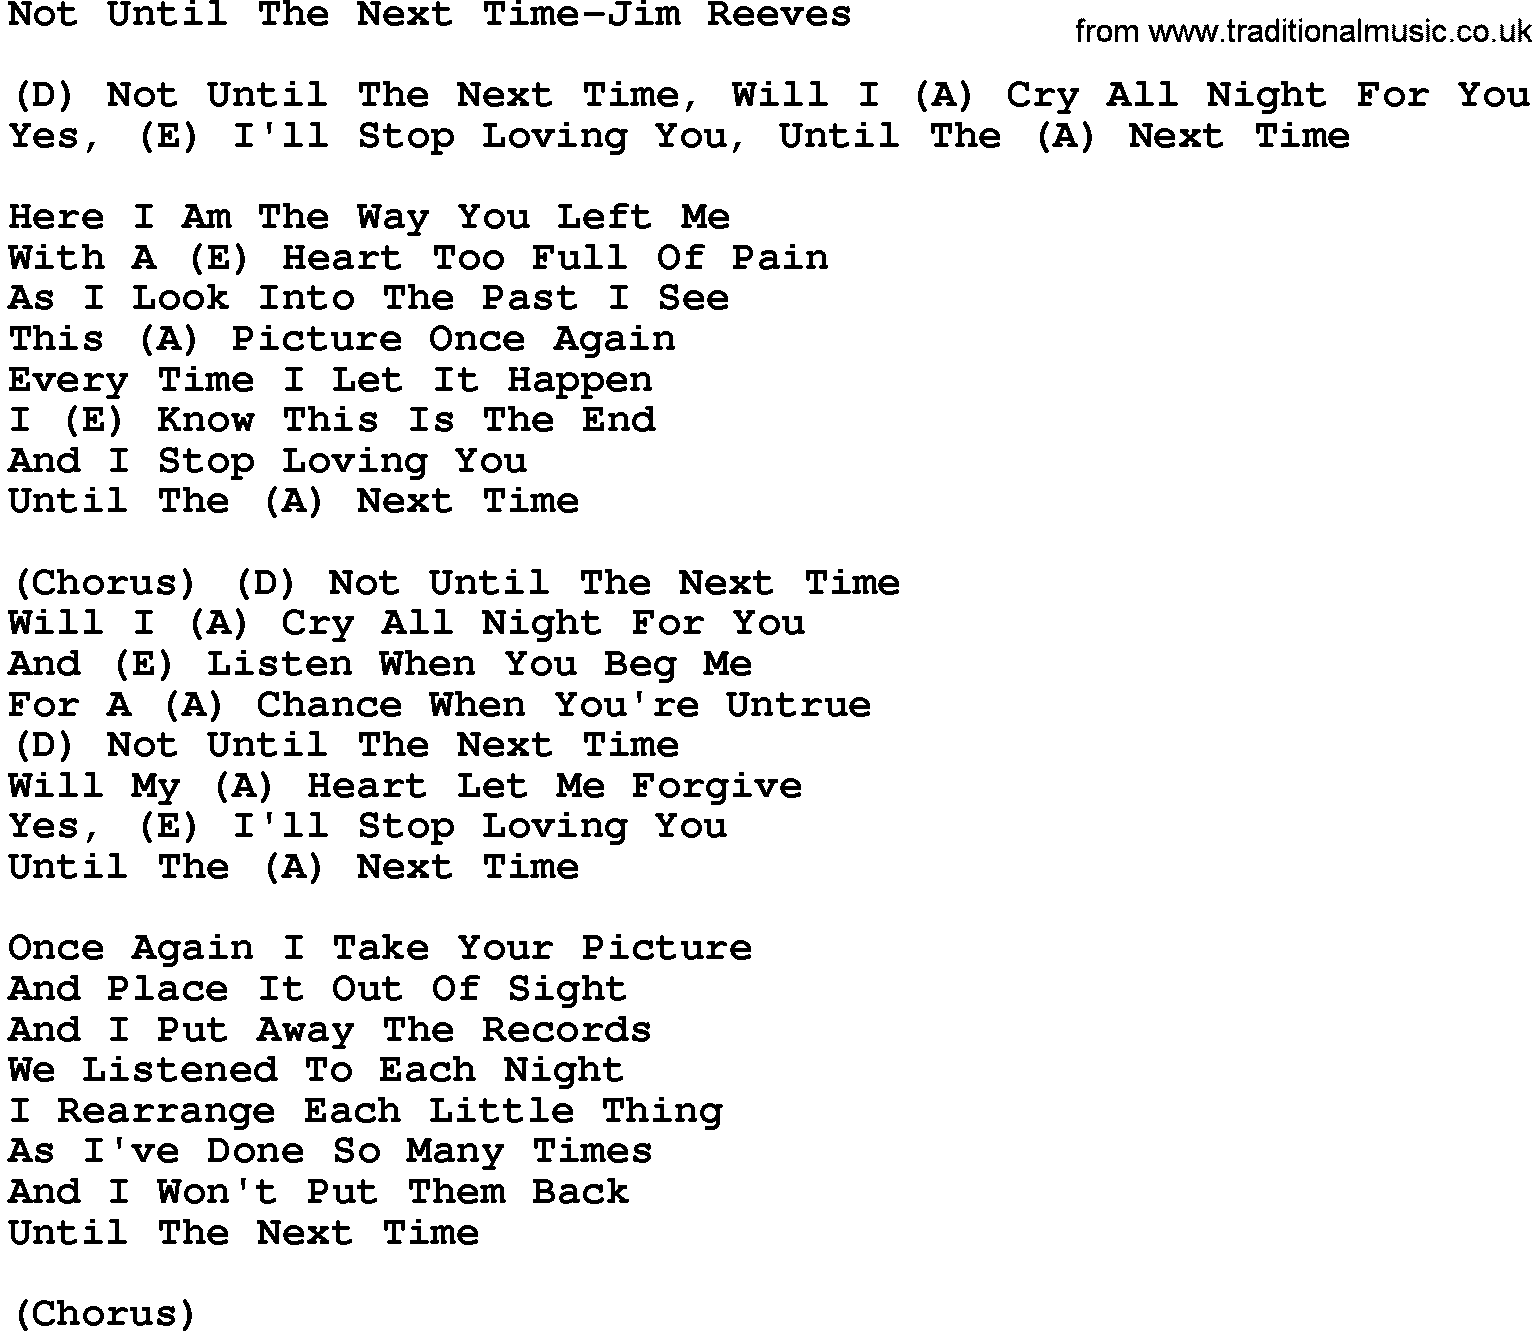 Country music song: Not Until The Next Time-Jim Reeves lyrics and chords